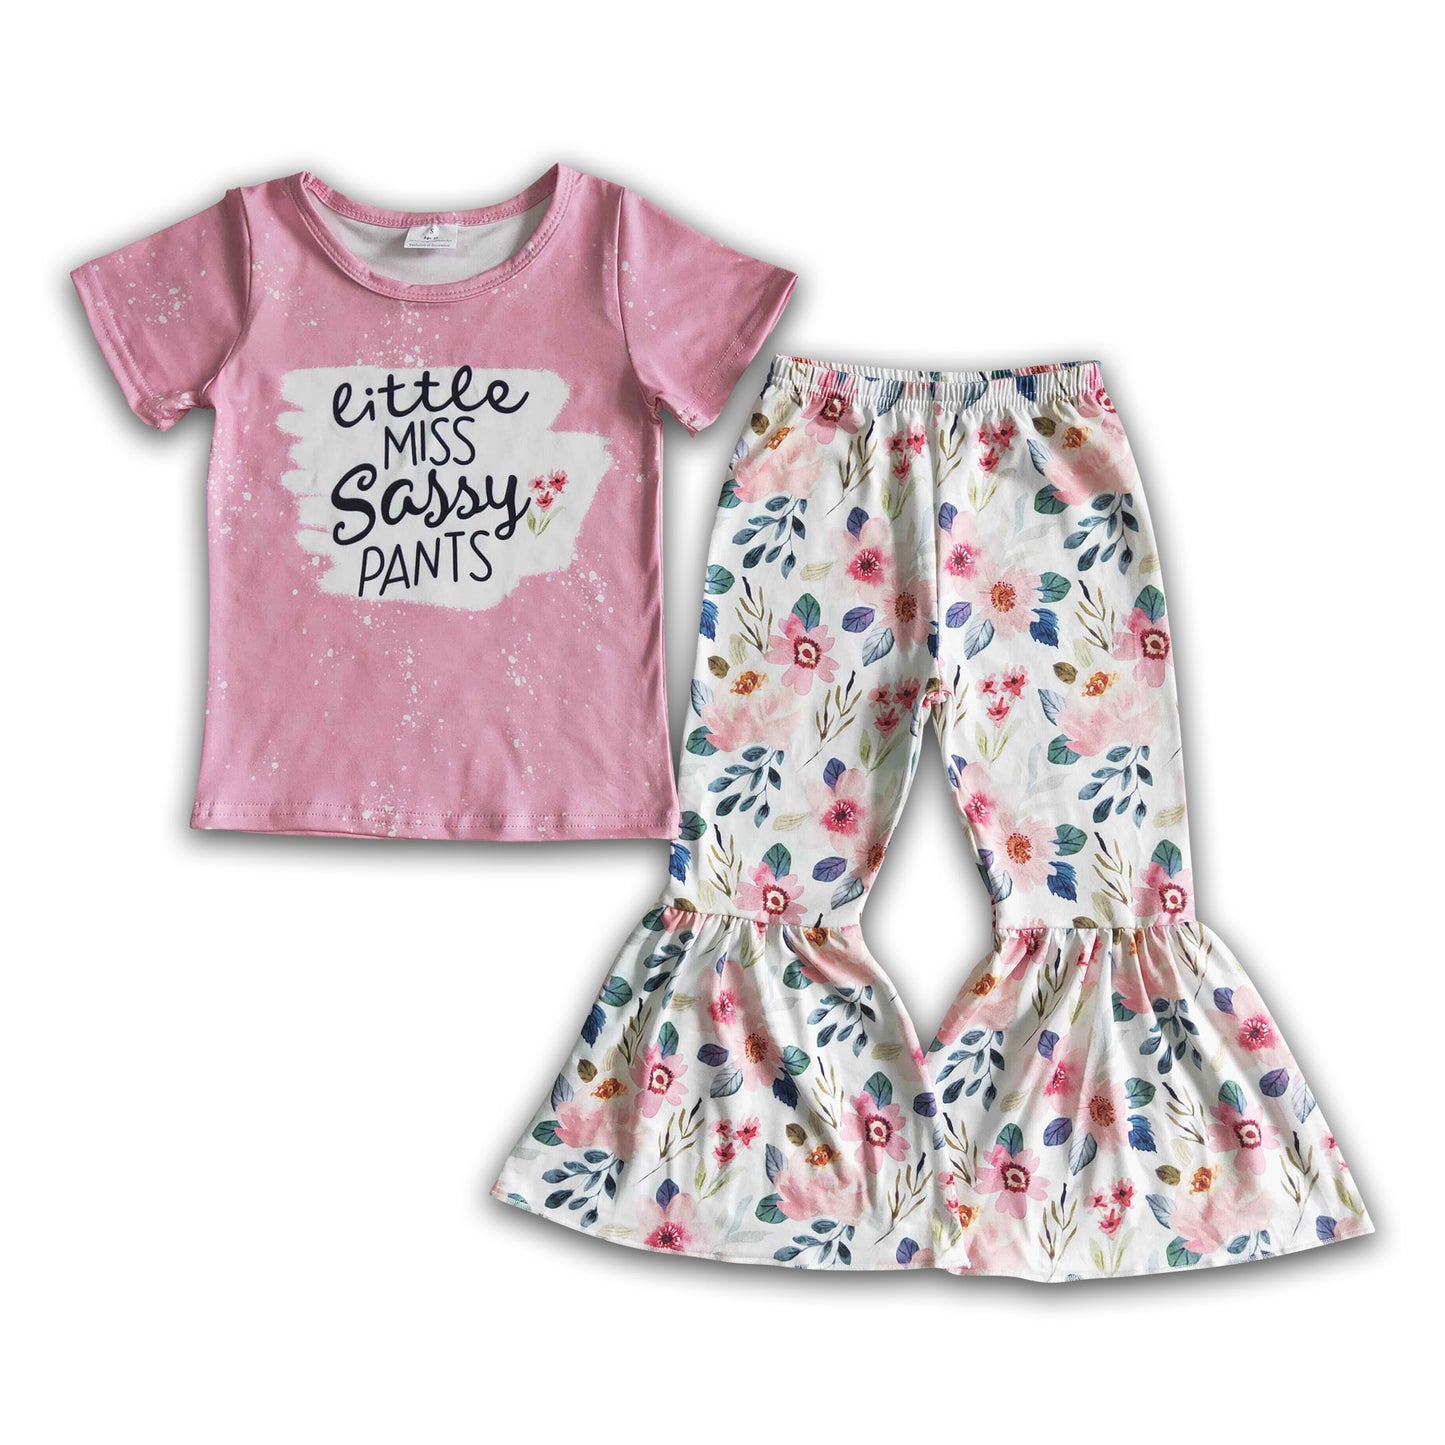 Little miss sassy pants shirt floral pants baby girl spring clothing